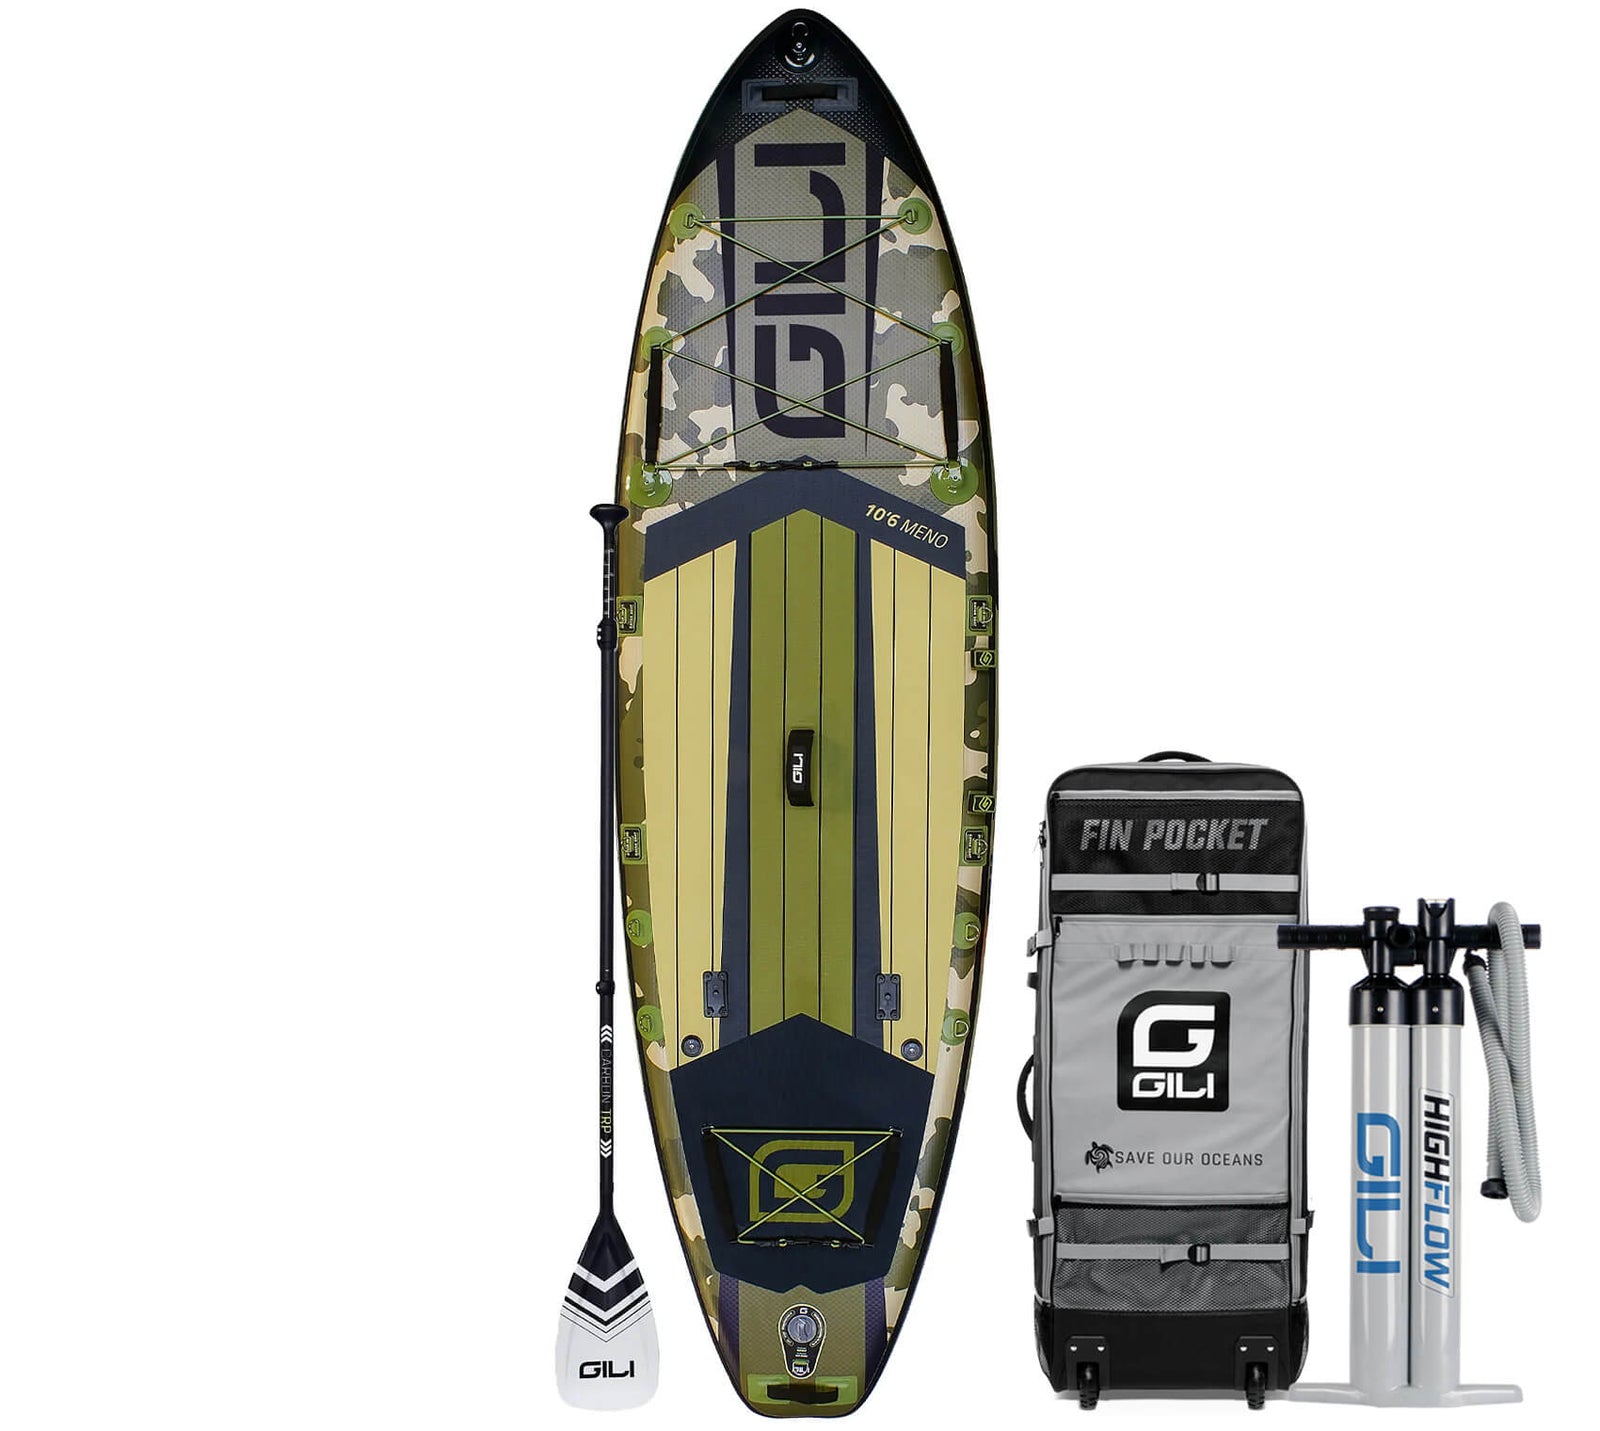  AKASO Inflatable Stand-Up Paddleboard, Yoga SUP with Backpack,  Non-Slip Deck, Waterproof Bag, Leash, Floating Paddle and Hand Pump :  Sports & Outdoors